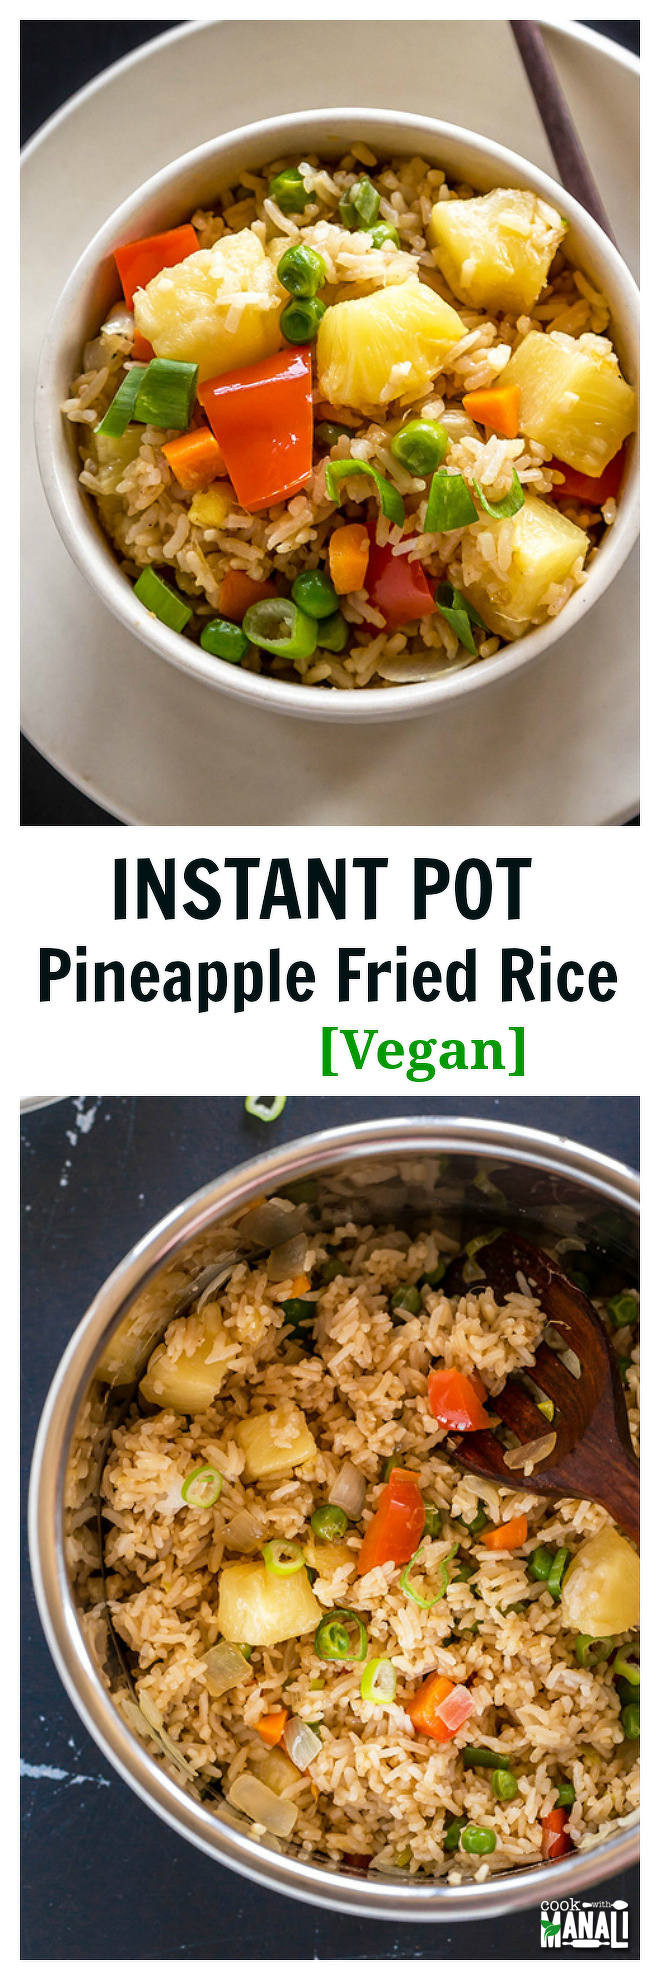 Instant Pot Vegetarian Recipes
 Instant Pot Vegan Pineapple Fried Rice Video Cook With